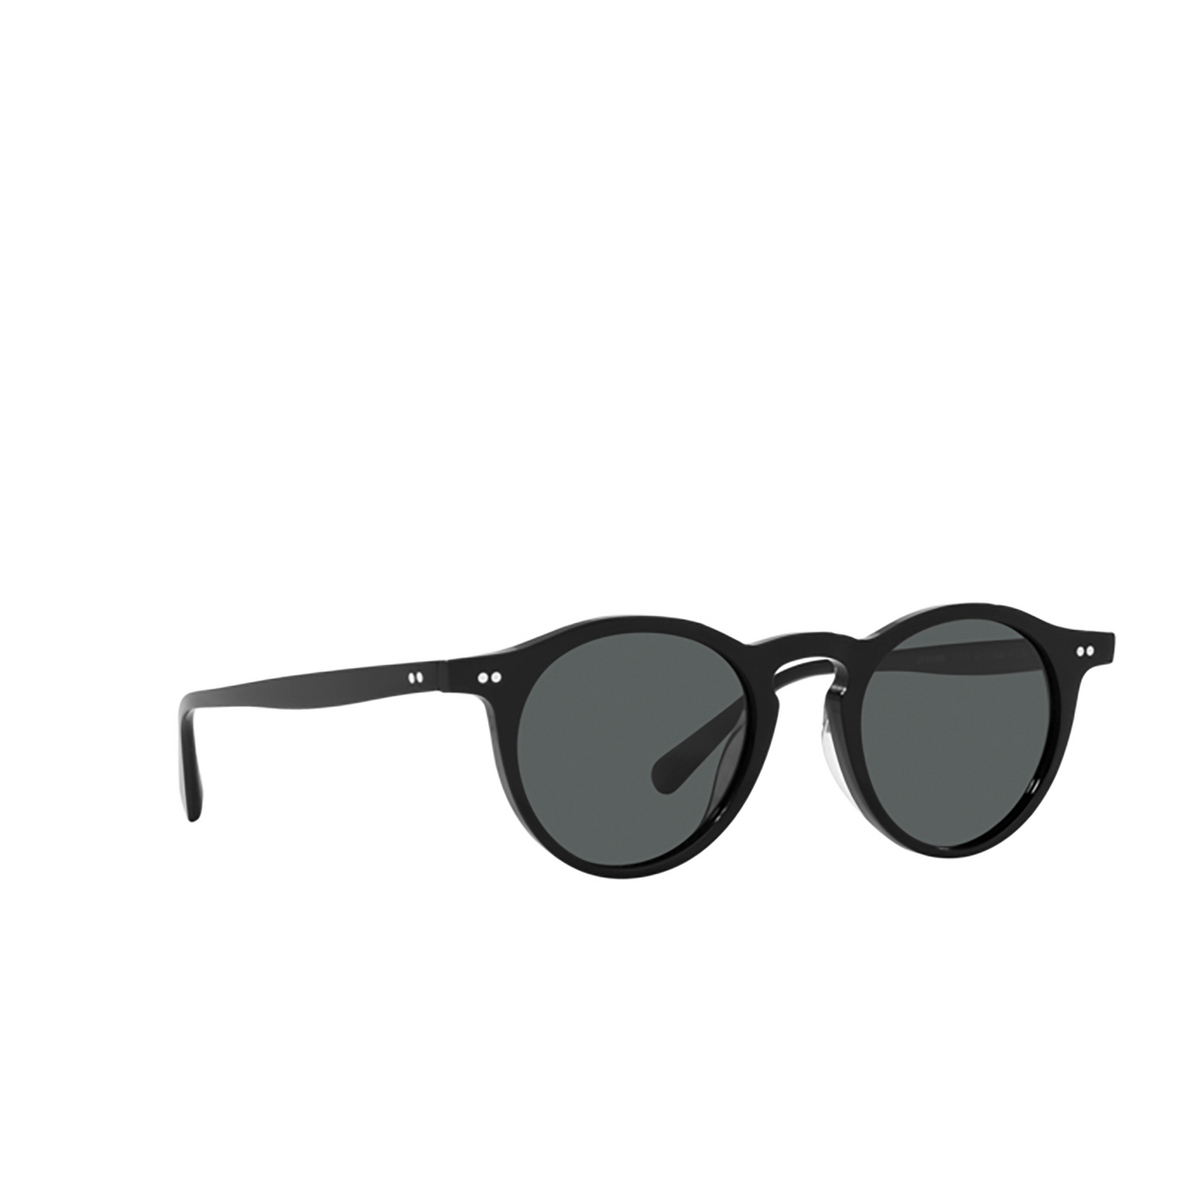 Oliver Peoples OP-13 Sunglasses 1731P2 Black - three-quarters view